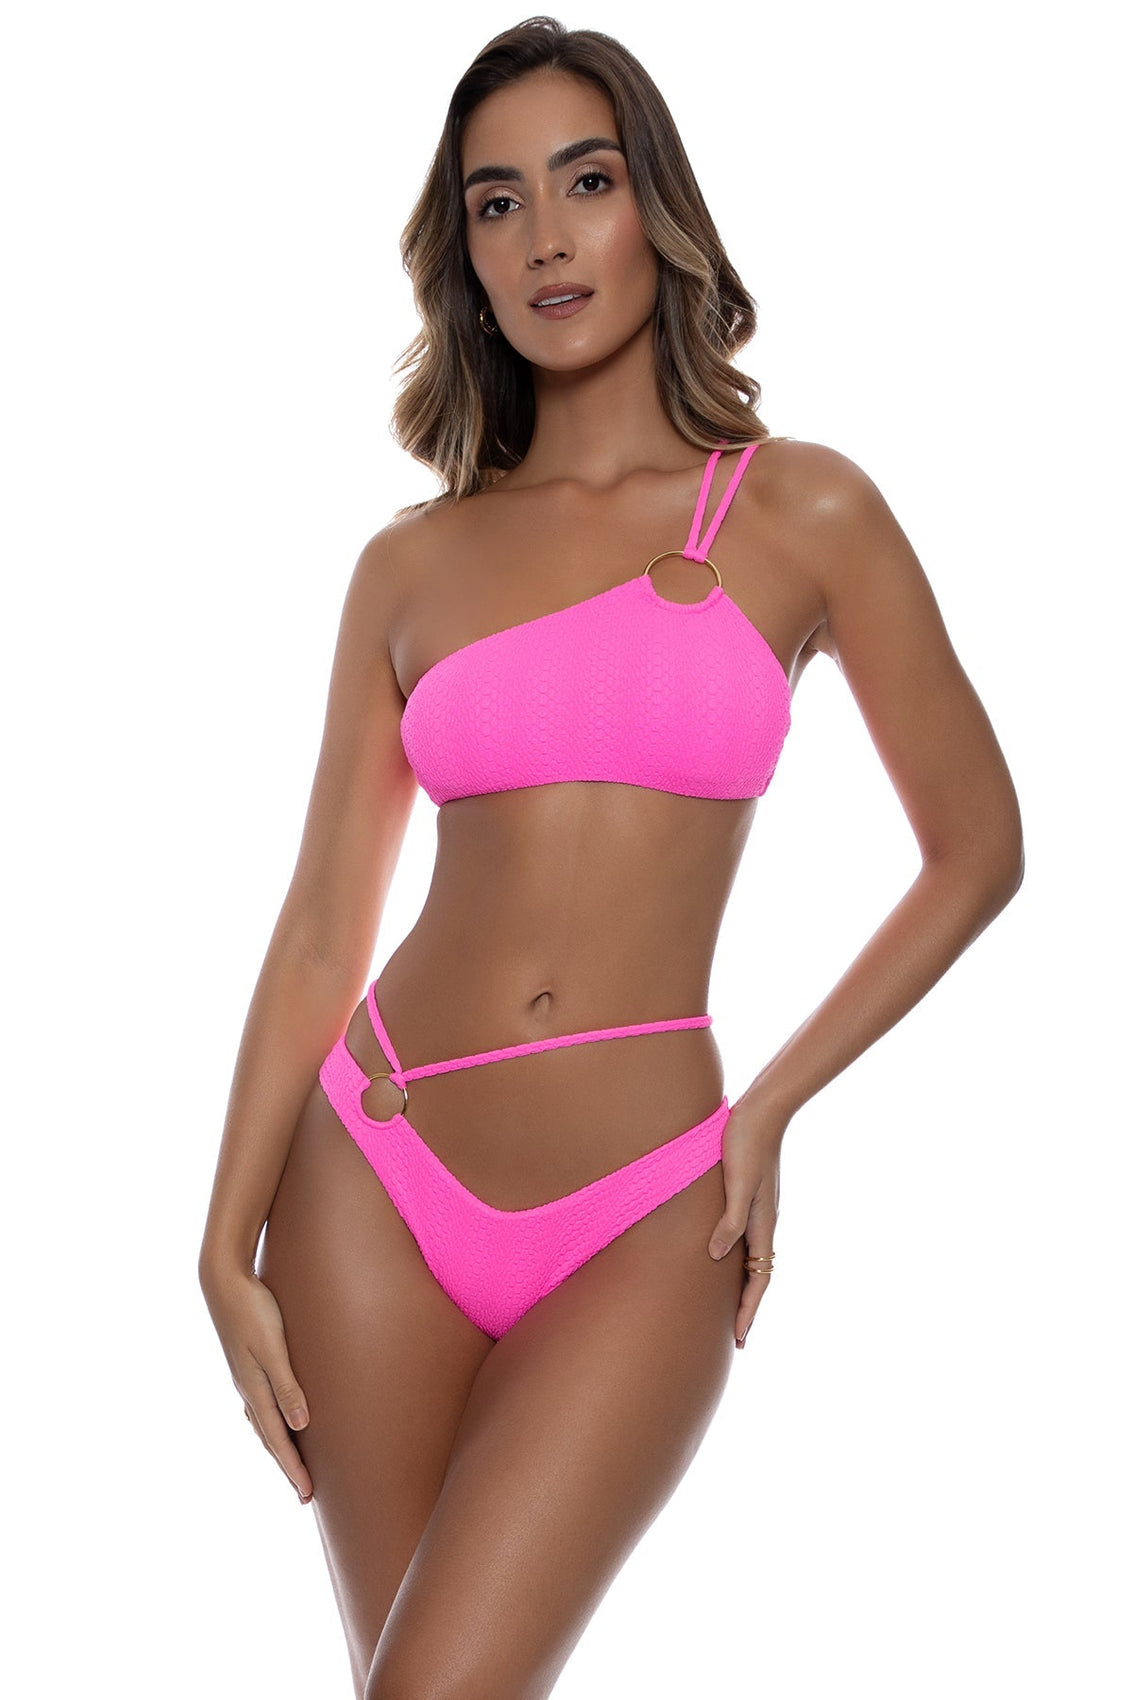 WAVY BABY - Asymmetric Ring Top & Moderate Ring Side Bottom • Blazing Pink